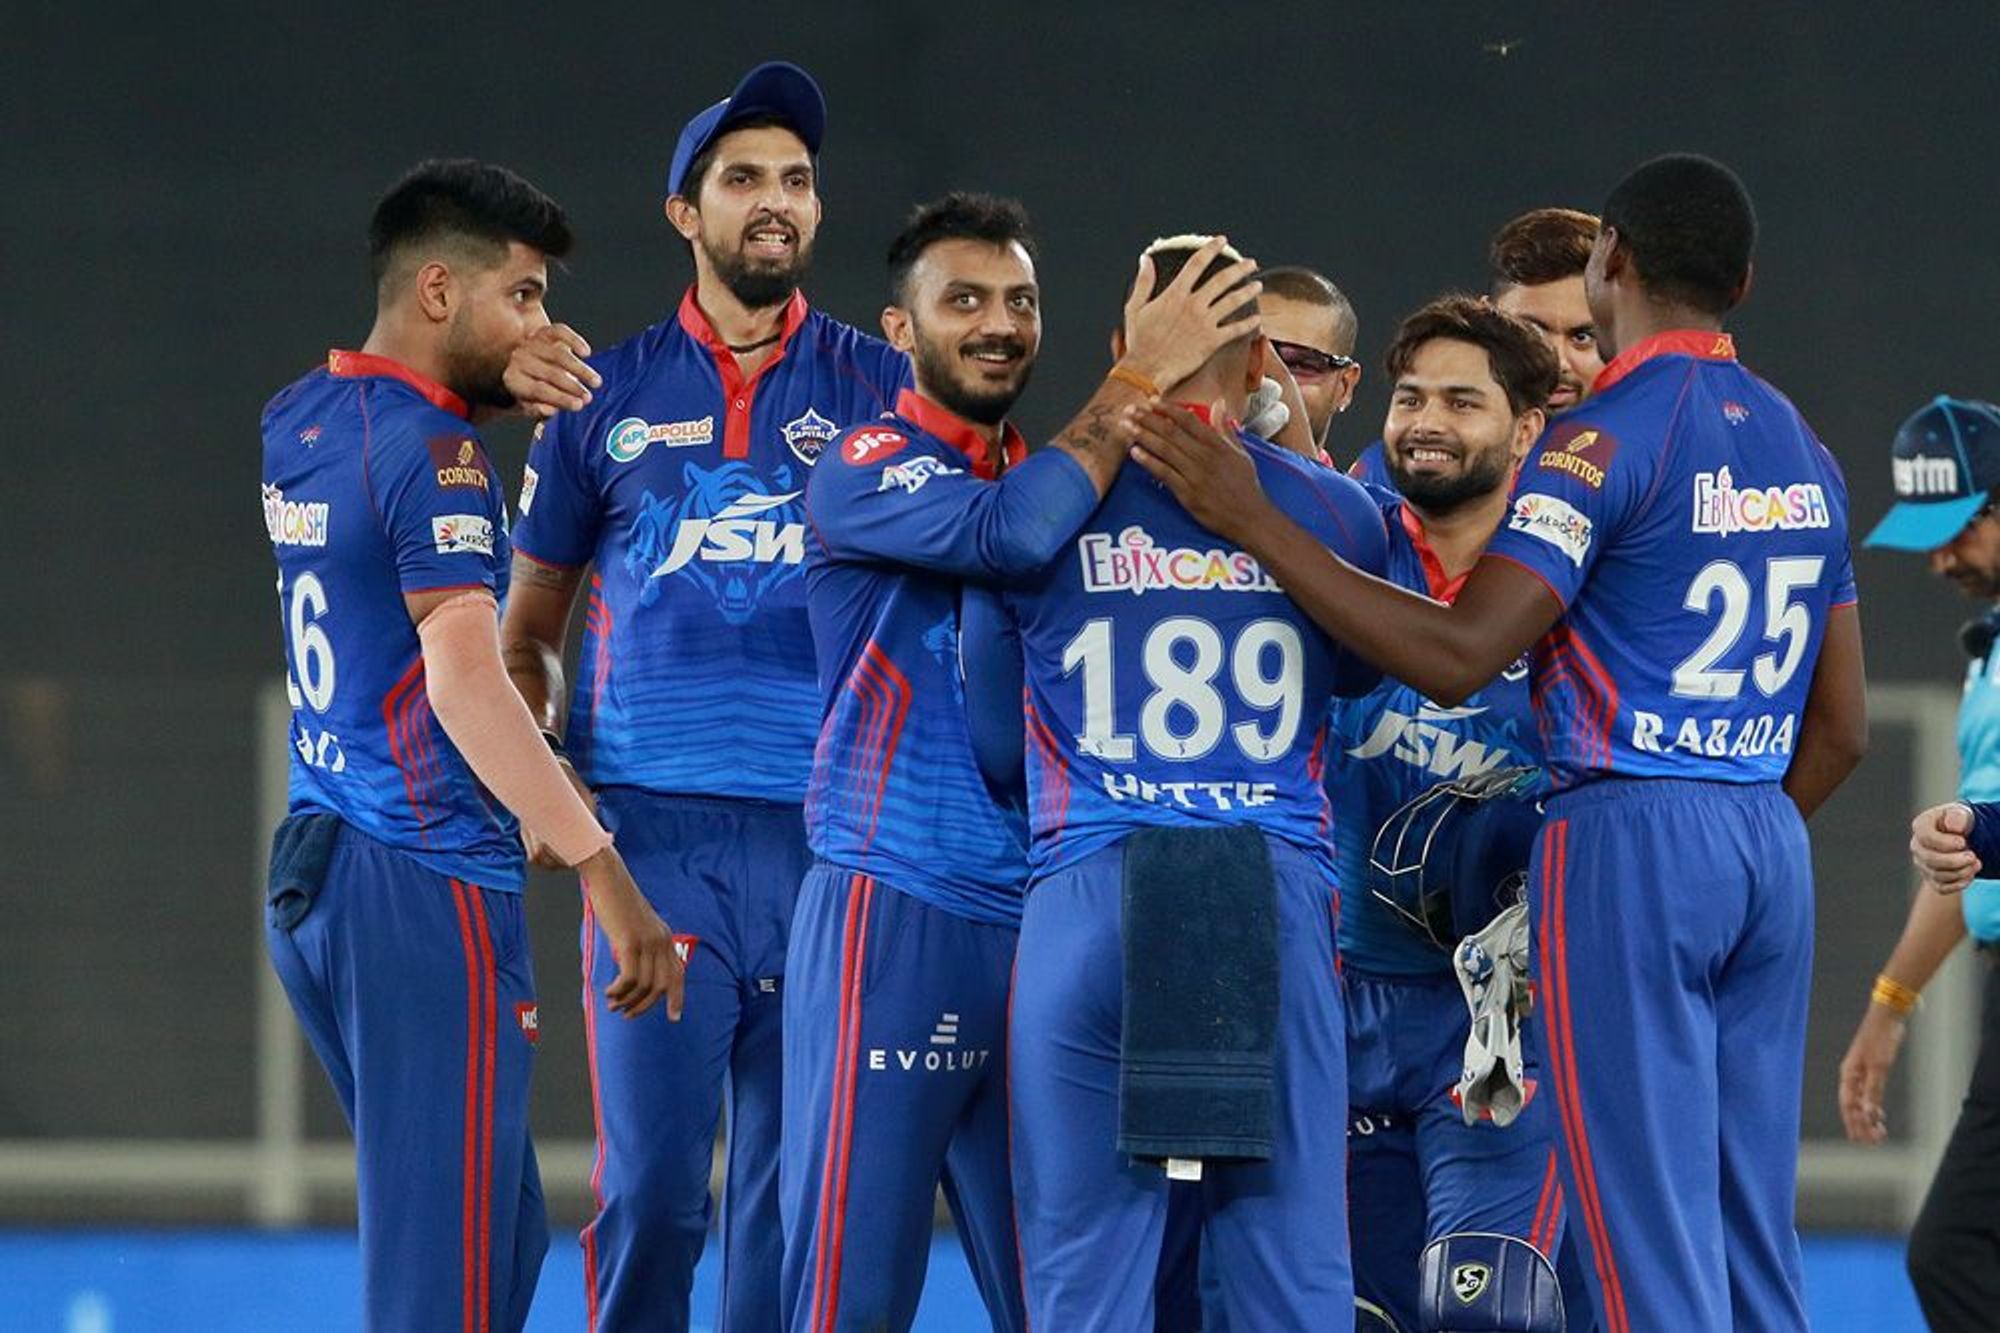 Delhi Capitals aims to repeat their IPL 2020 performance this season in the UAE | BCCI/IPL